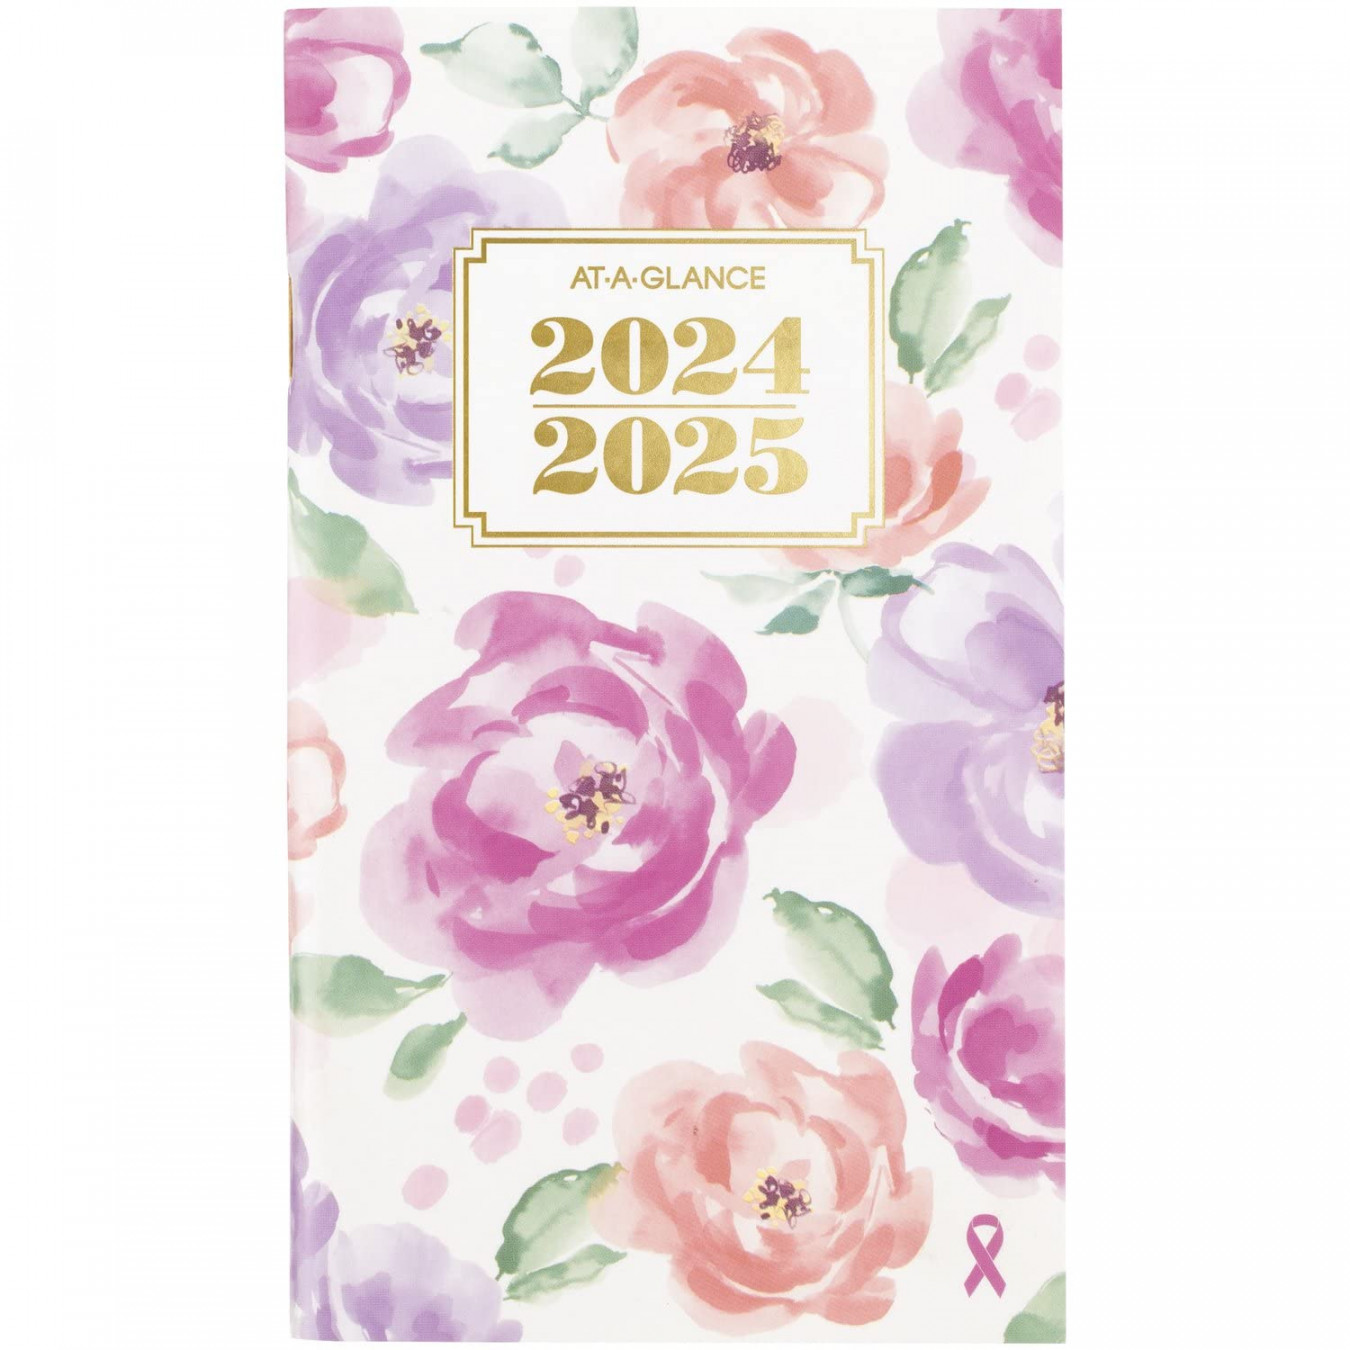 AT-A-GLANCE - Two Year Monthly Planner, -/" x ", Pocket Size, City of Hope, Badge Floral (75F-0-4)